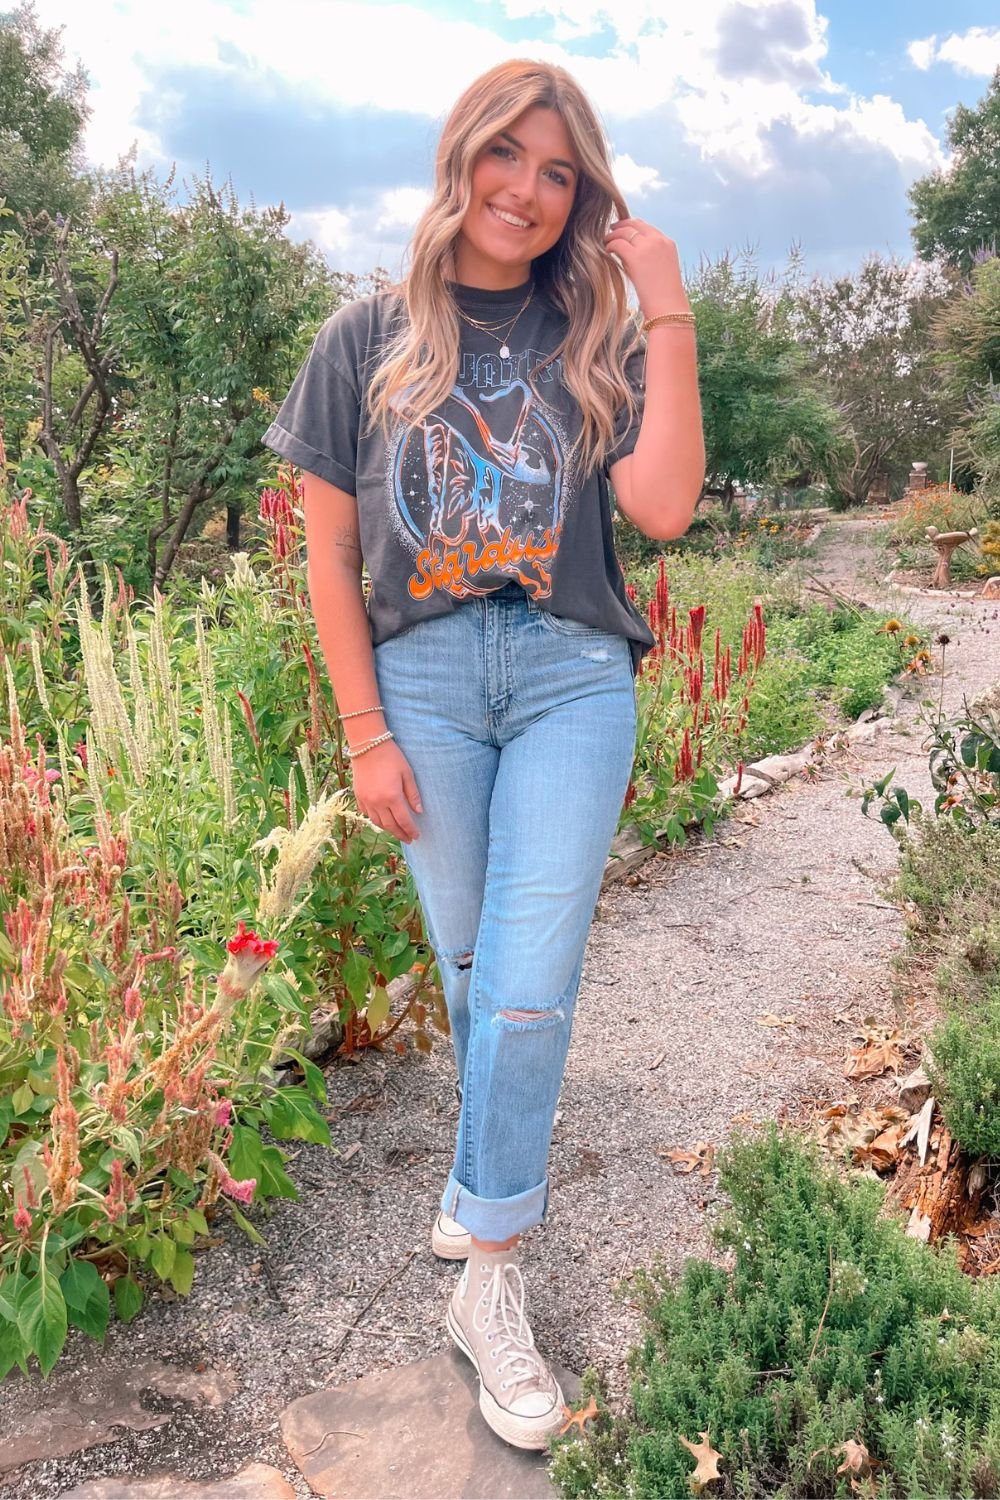 Coastal Cowgirl Country Stardust | Graphic Tee | Girl Dangerous - Women's Shirts & Tops - Blooming Daily